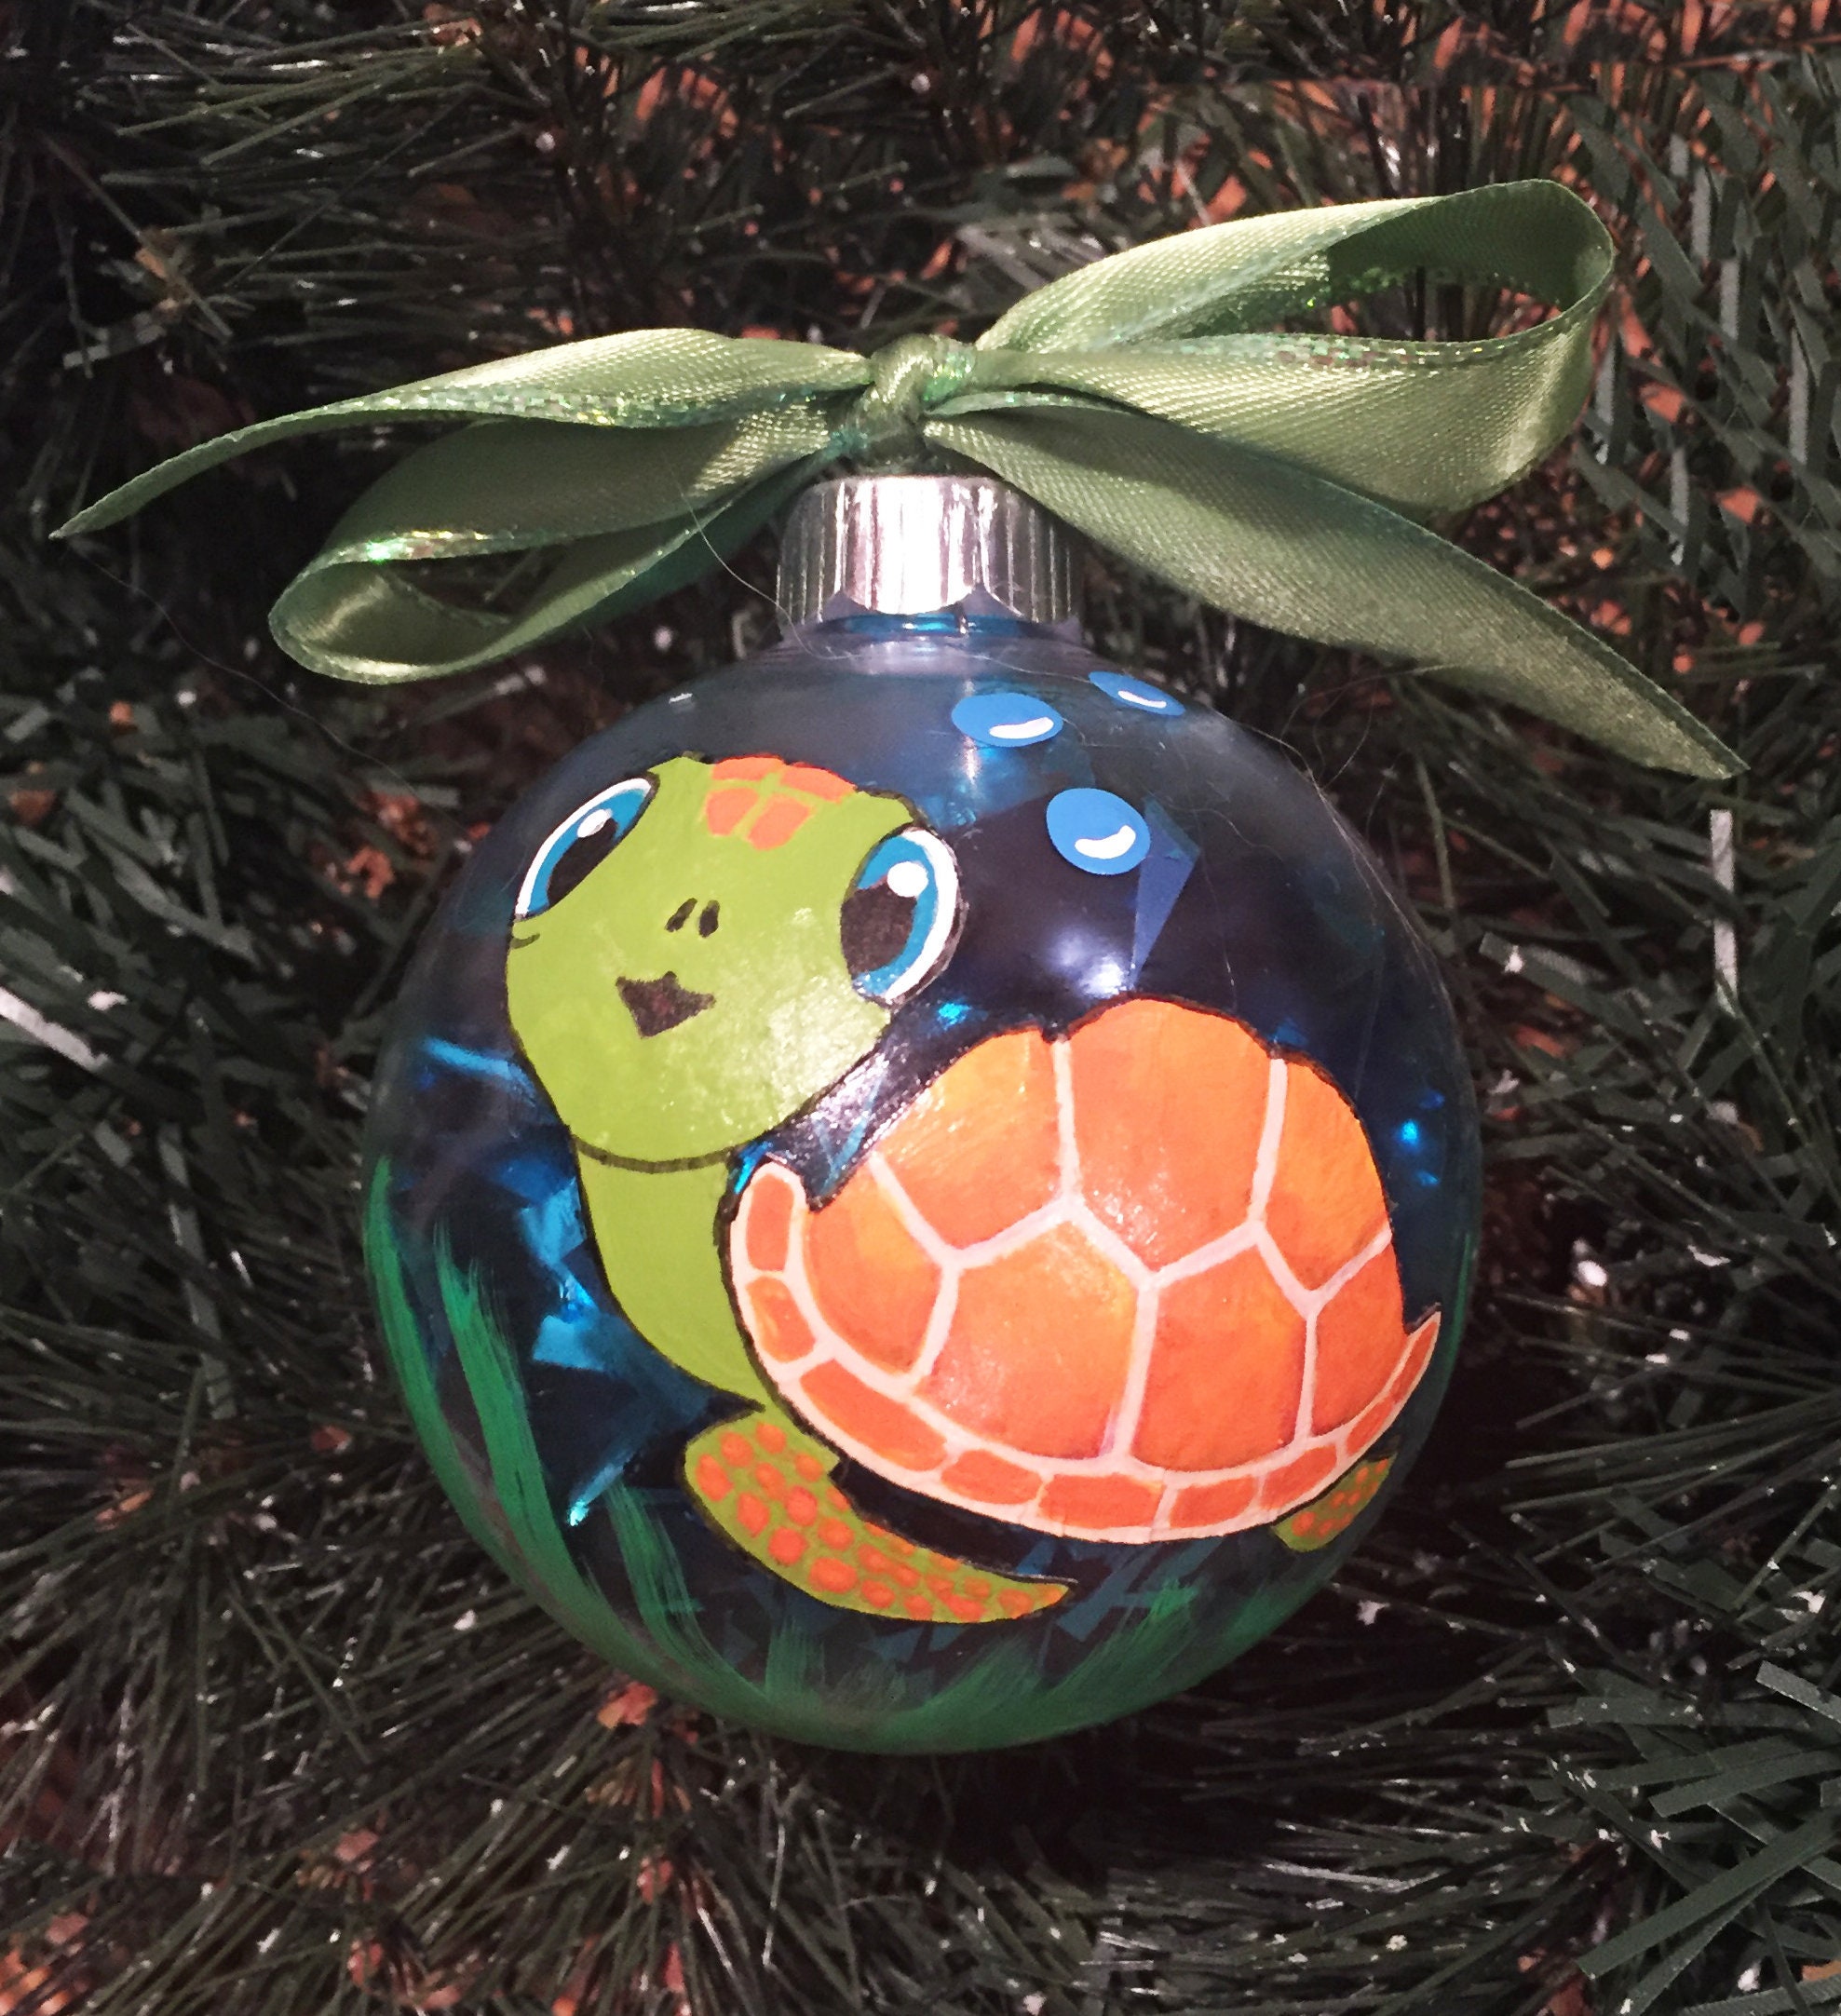 Personalized Hand Painted Sea Turtle Christmas Ornament